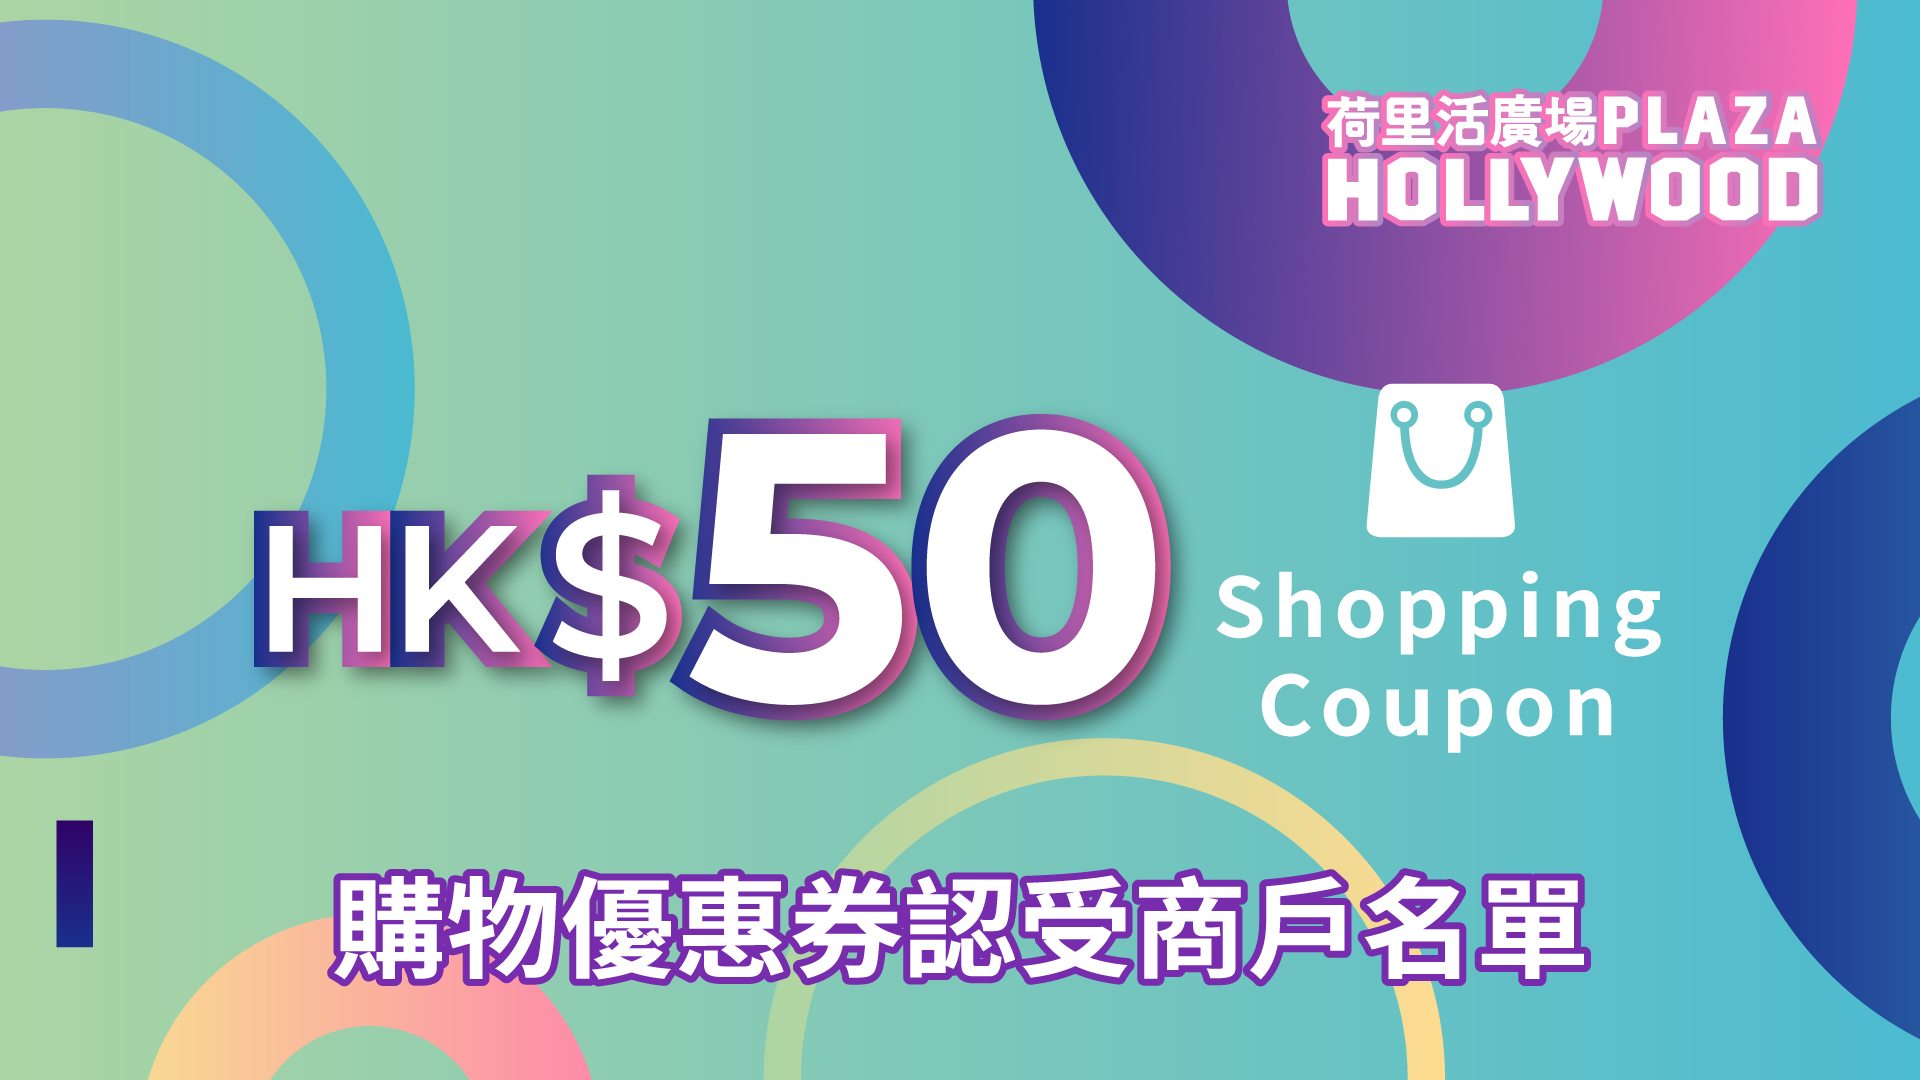 Plaza Hollywood Shopping HK$50 Conditional Coupon - Participating designated outlets at Plaza Hollywood